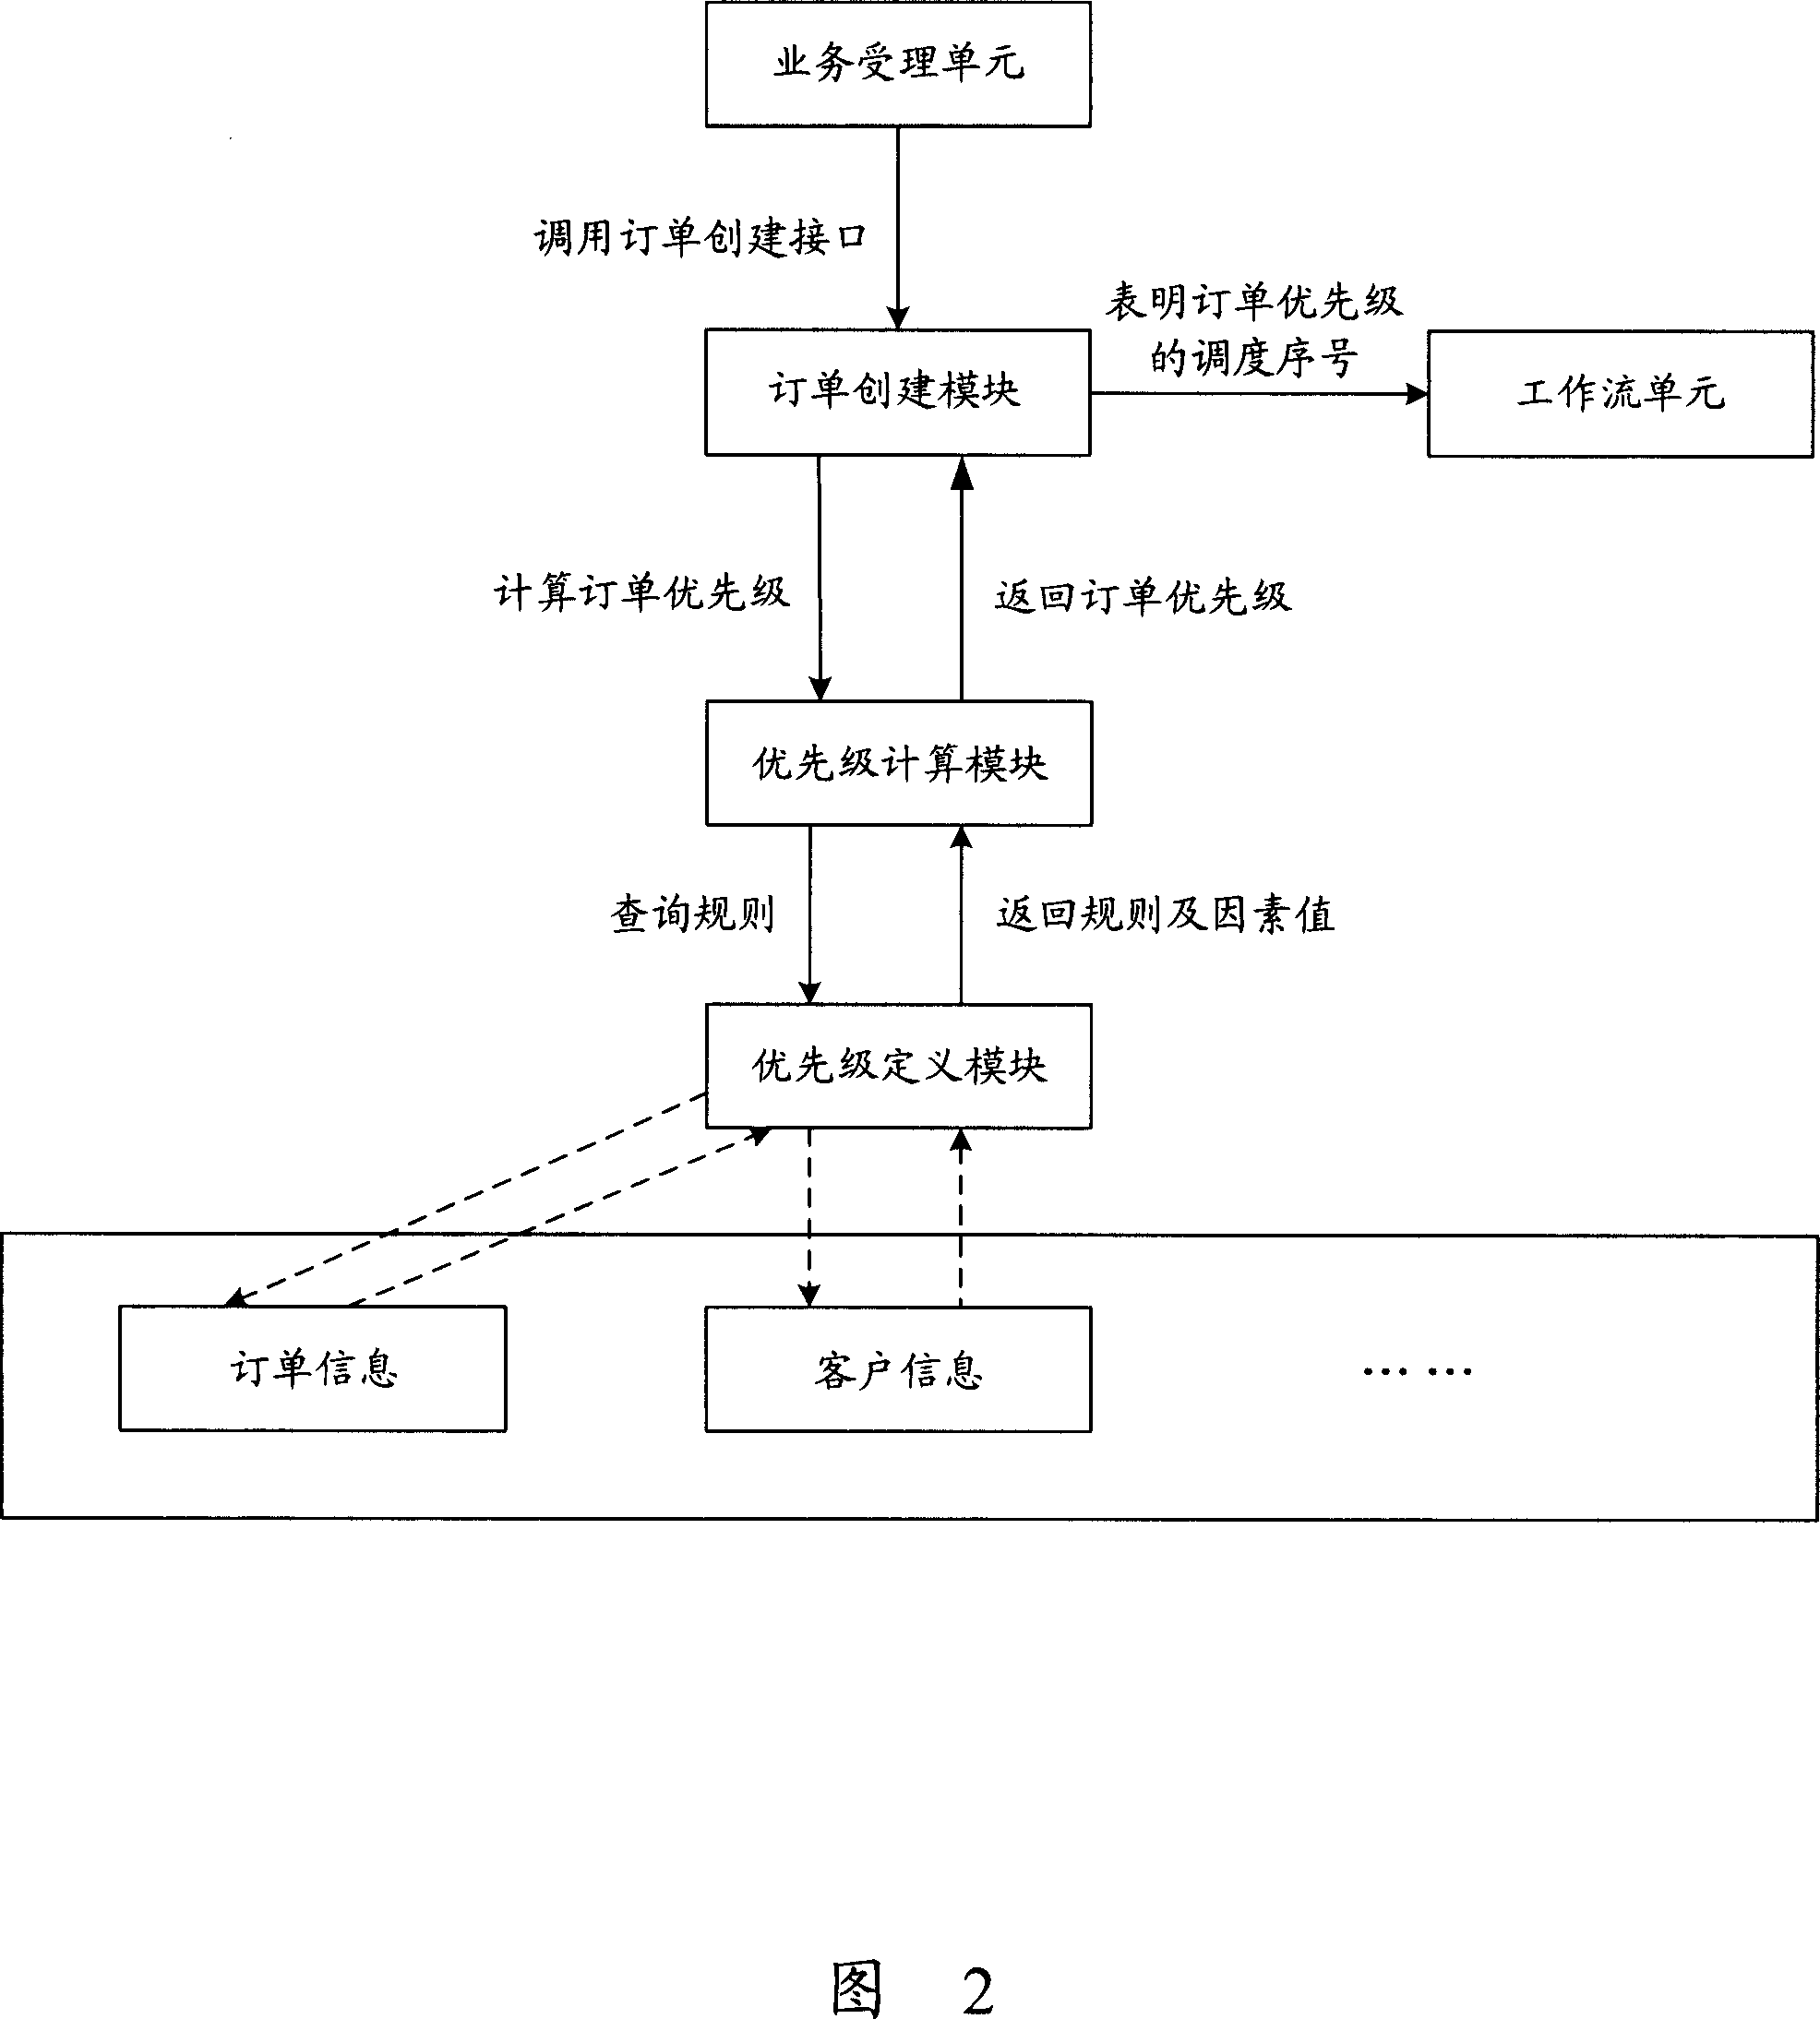 System and method for realizing order dispatch based on priority level